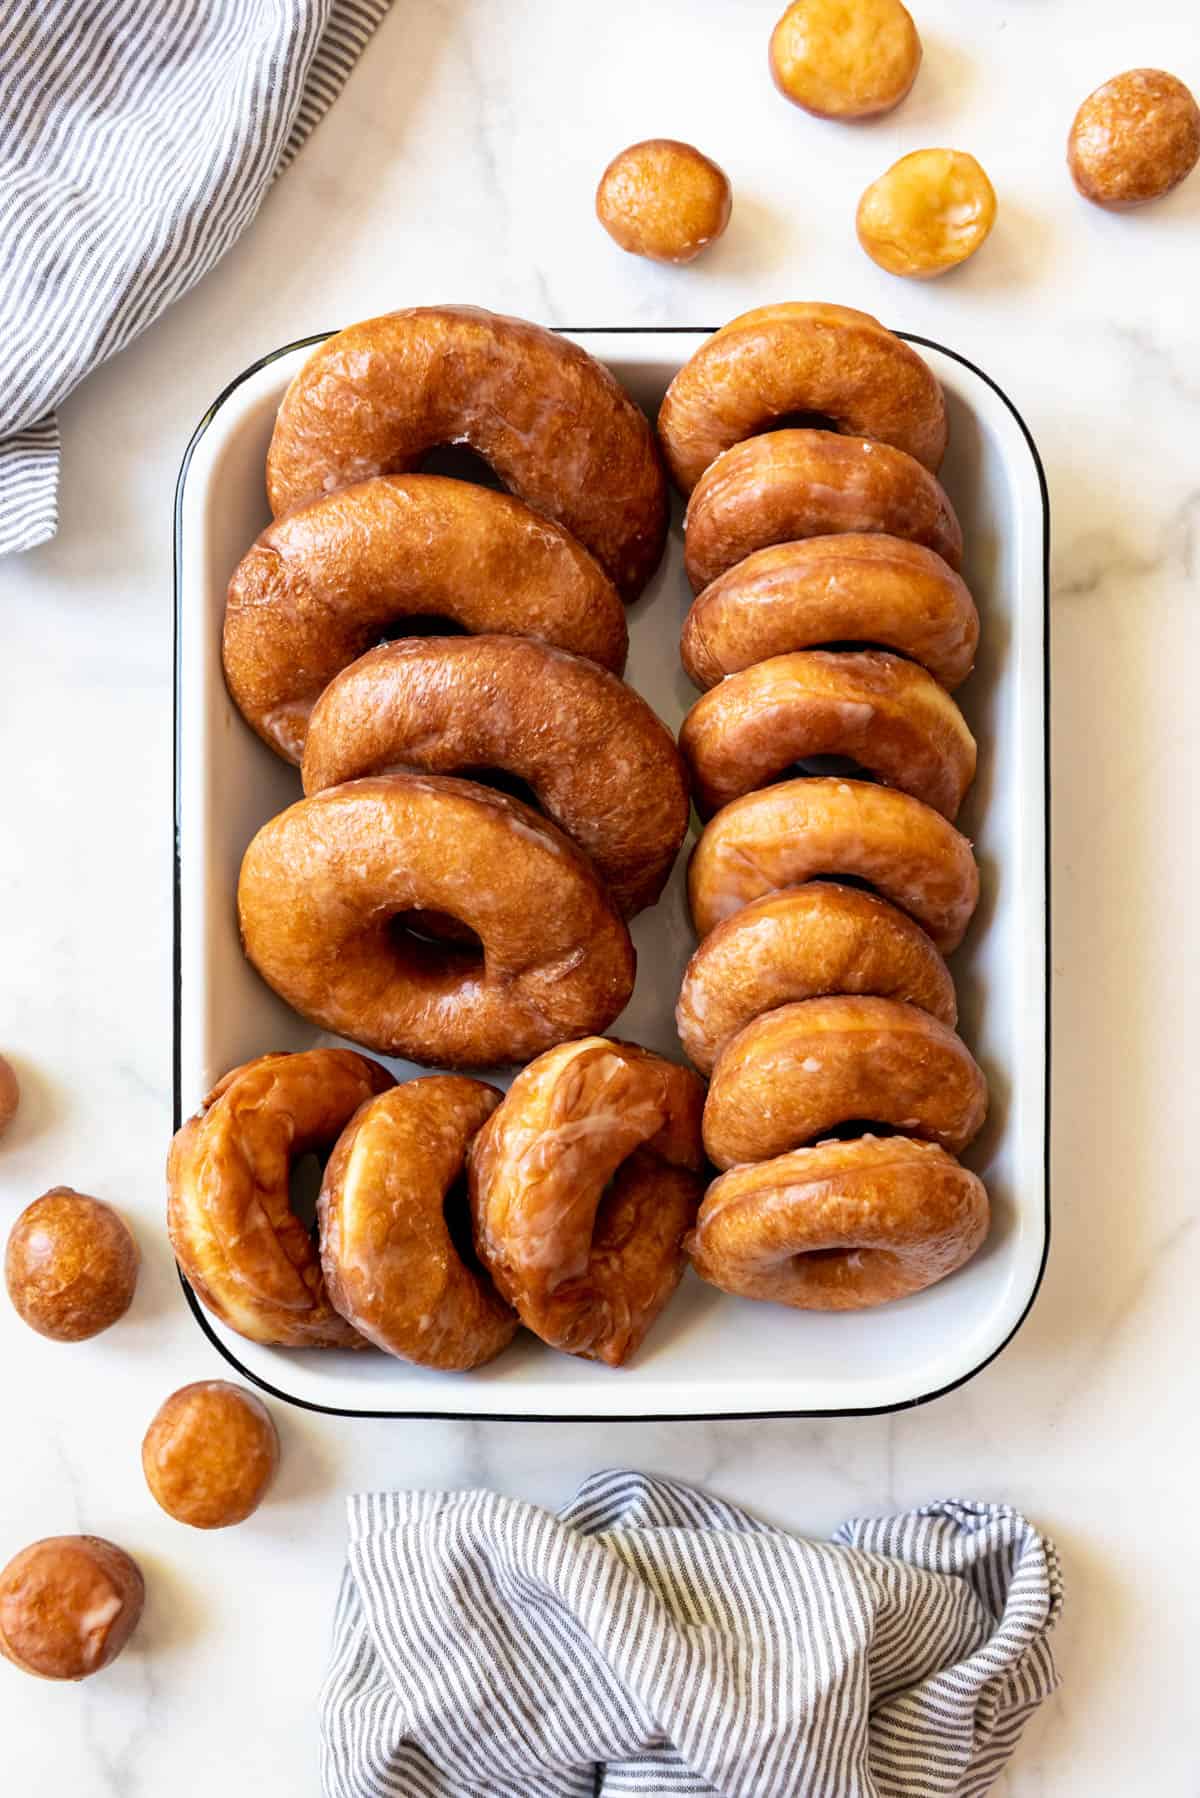 An overhead image of more than a dozen glazed donuts in a white baking dish.